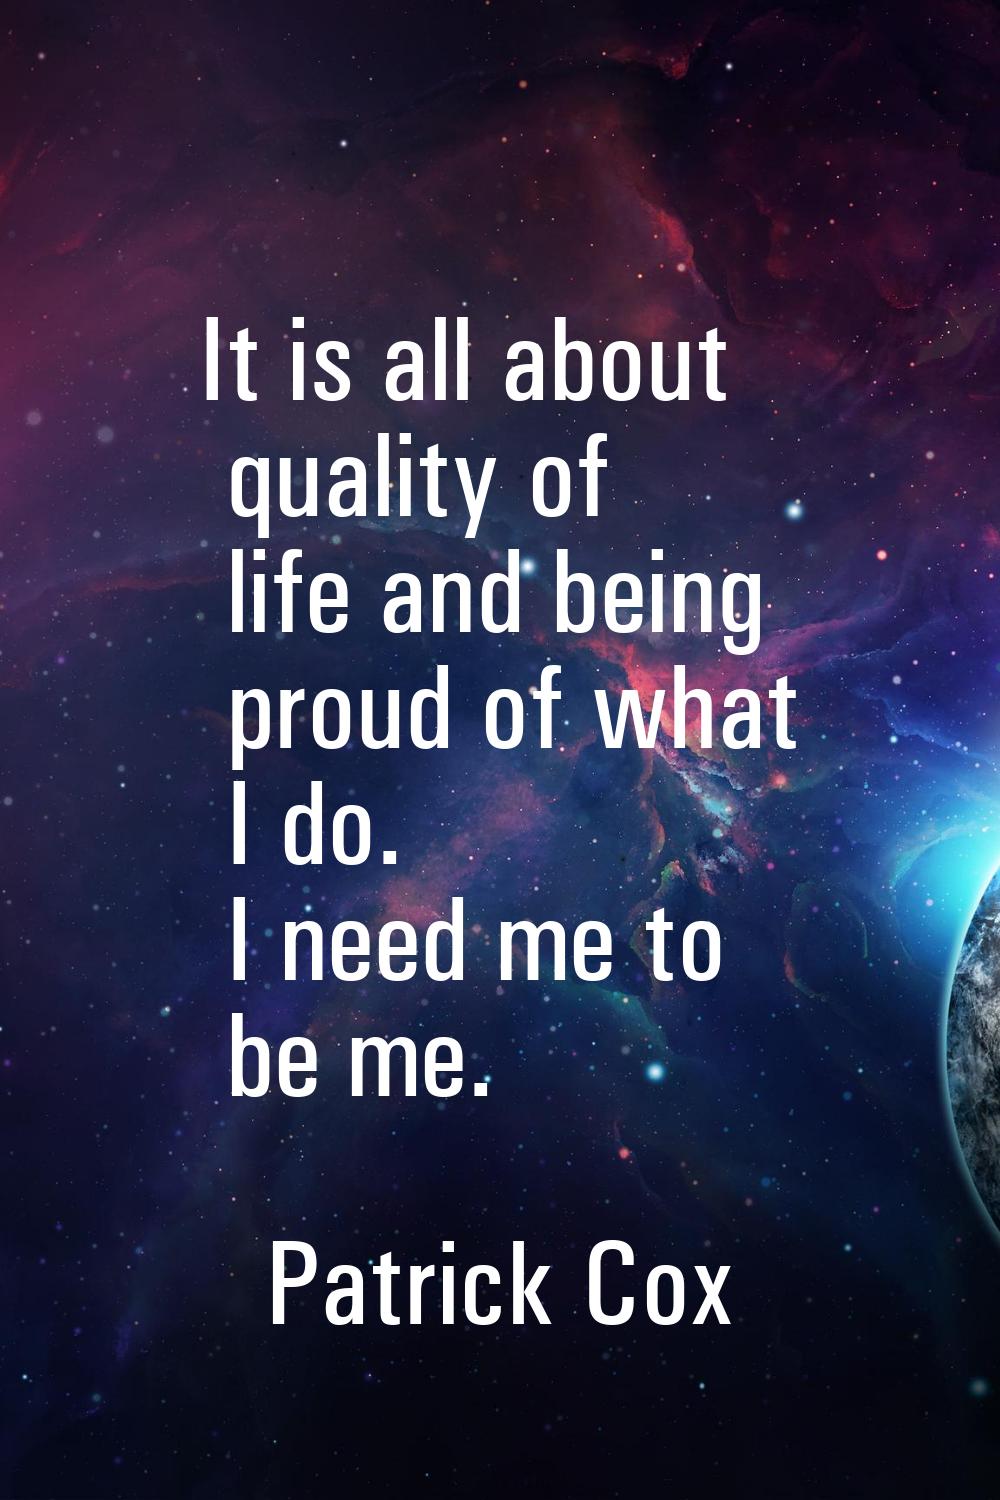 It is all about quality of life and being proud of what I do. I need me to be me.